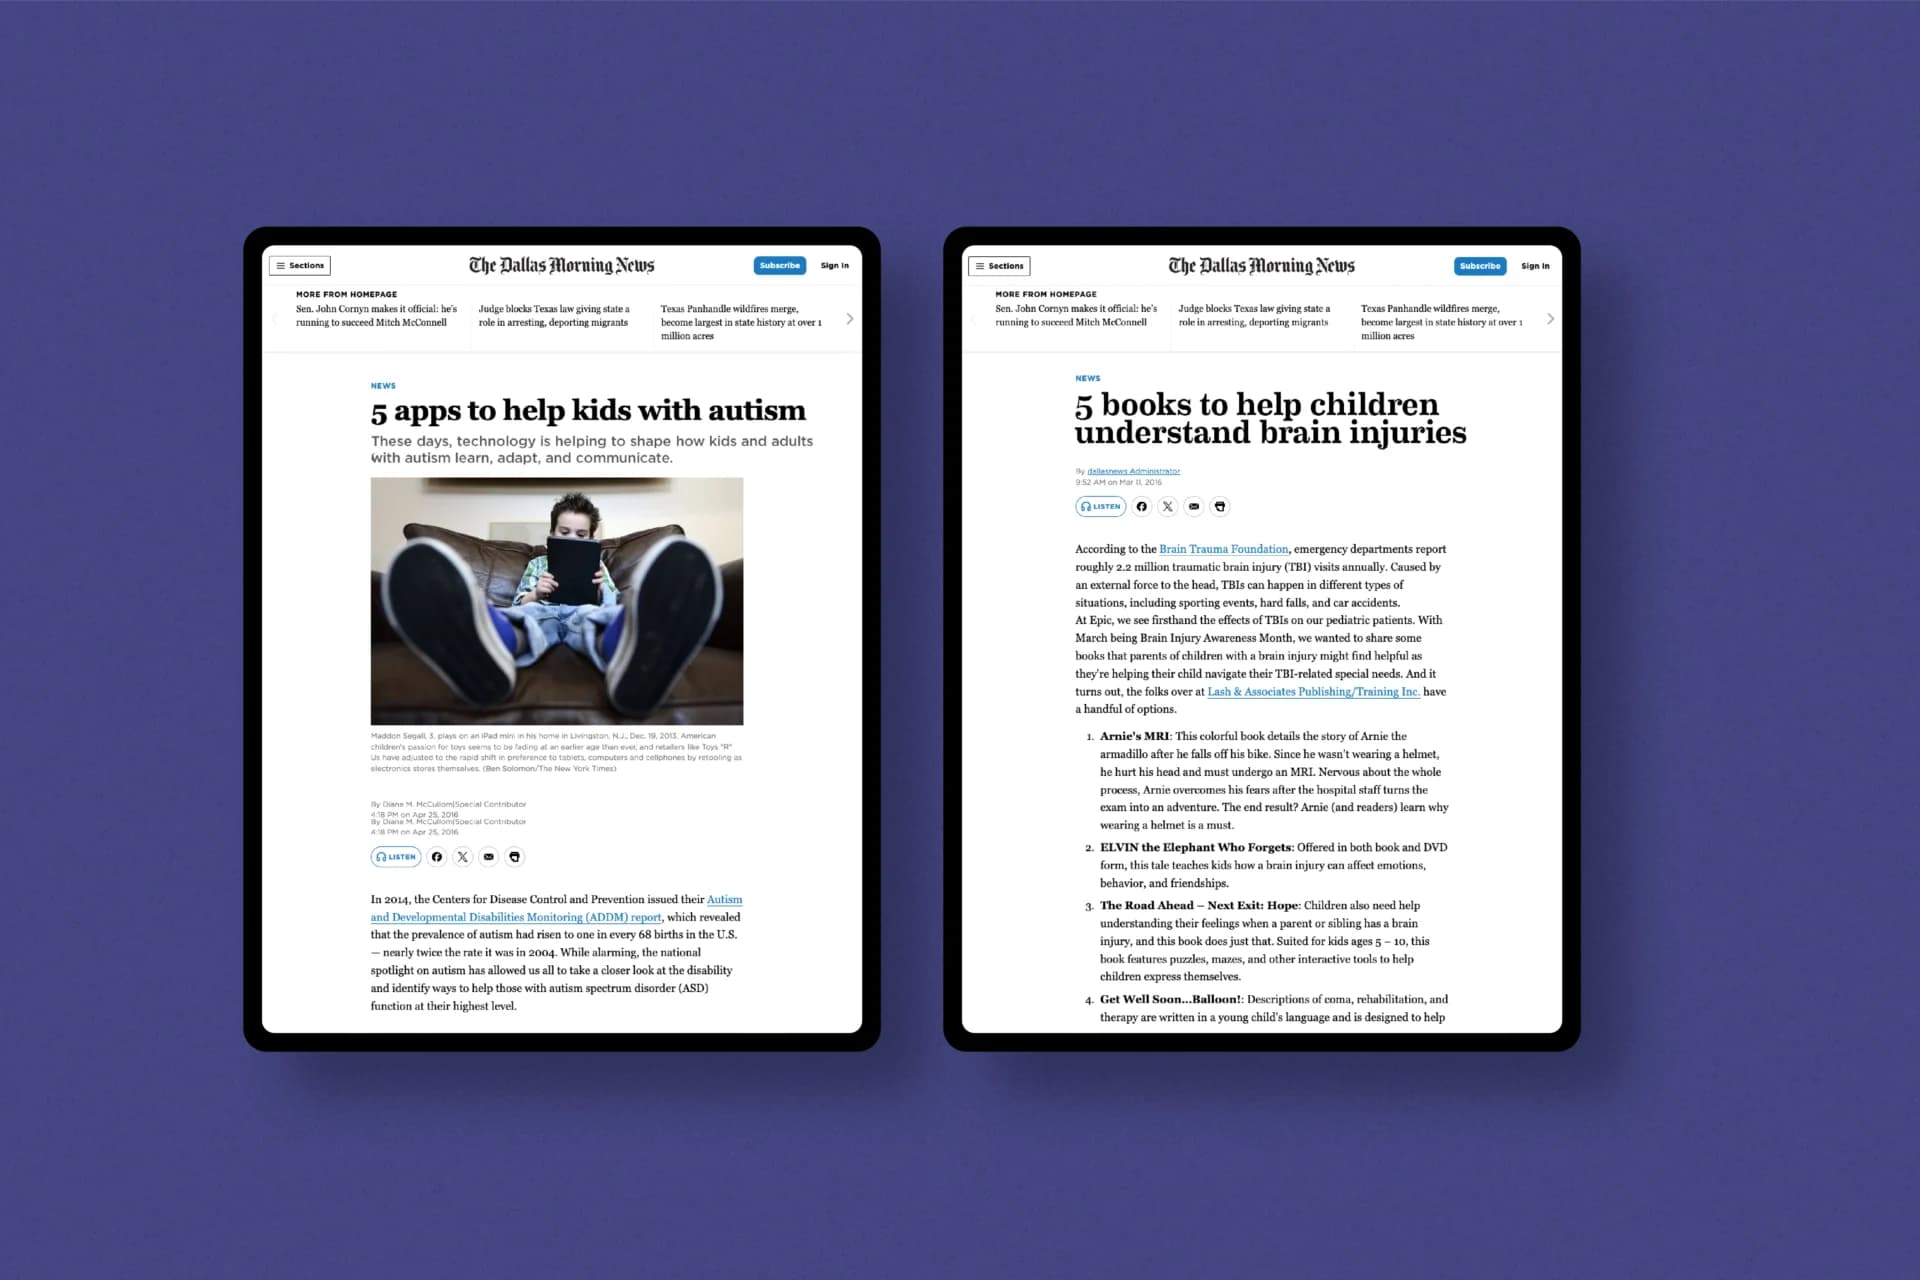 Two smartphones displaying identical pages side by side